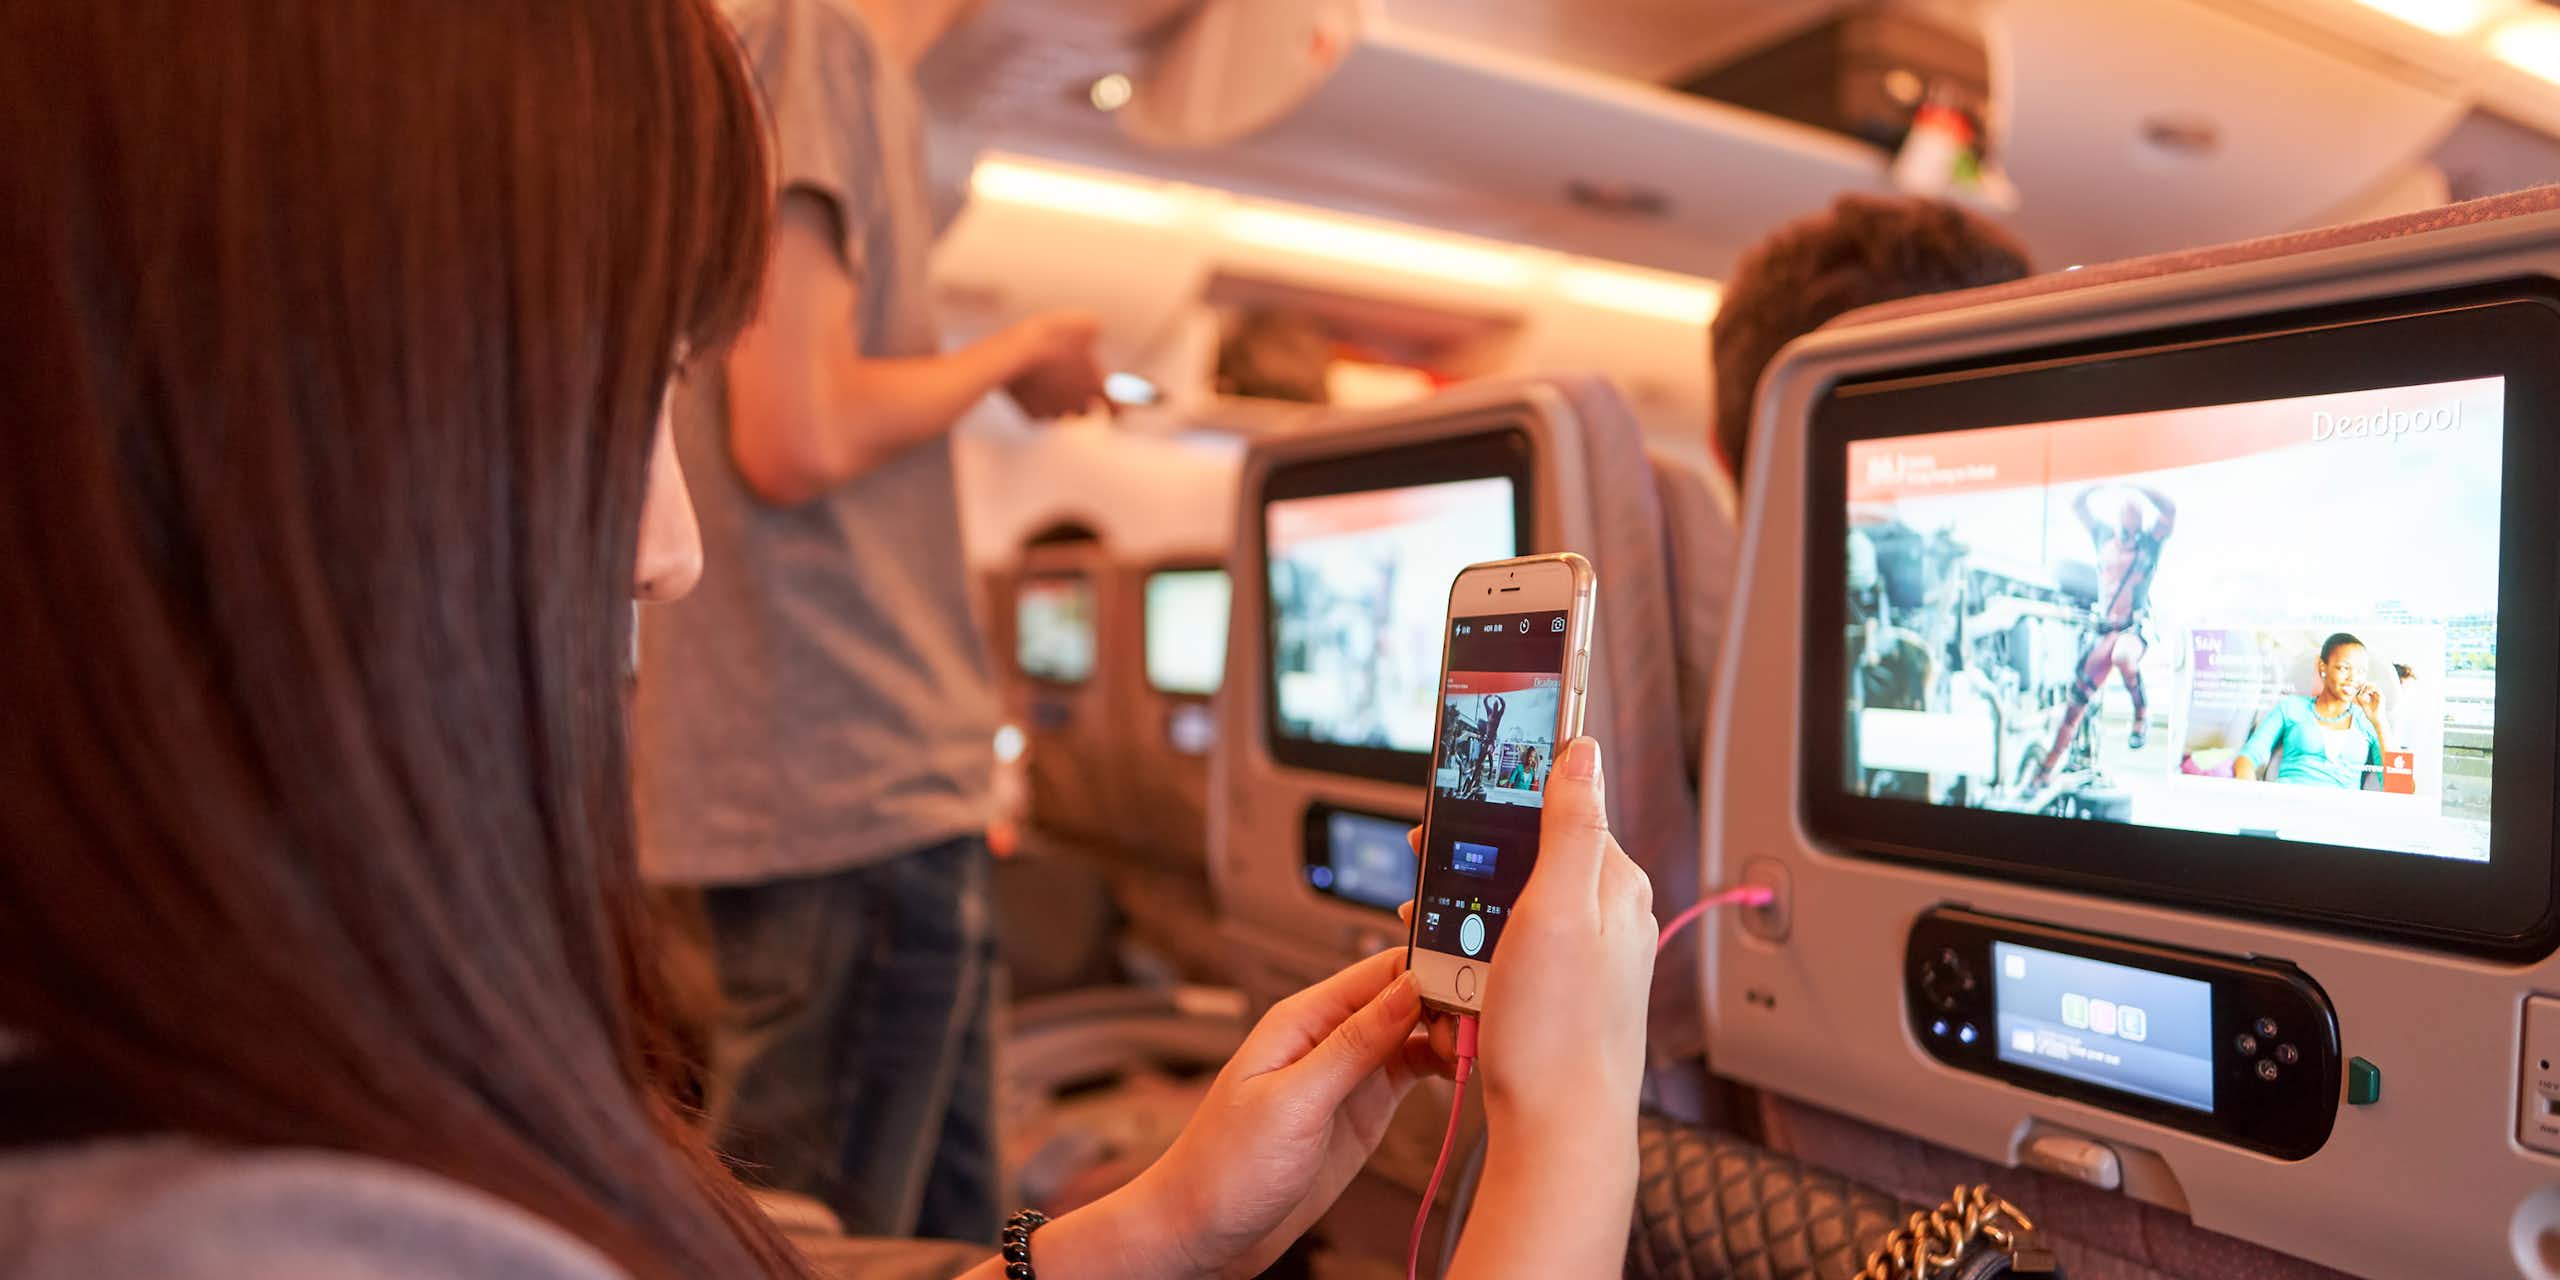 A woman taking a photo of the screen on the back of an airline seat with her cellphone